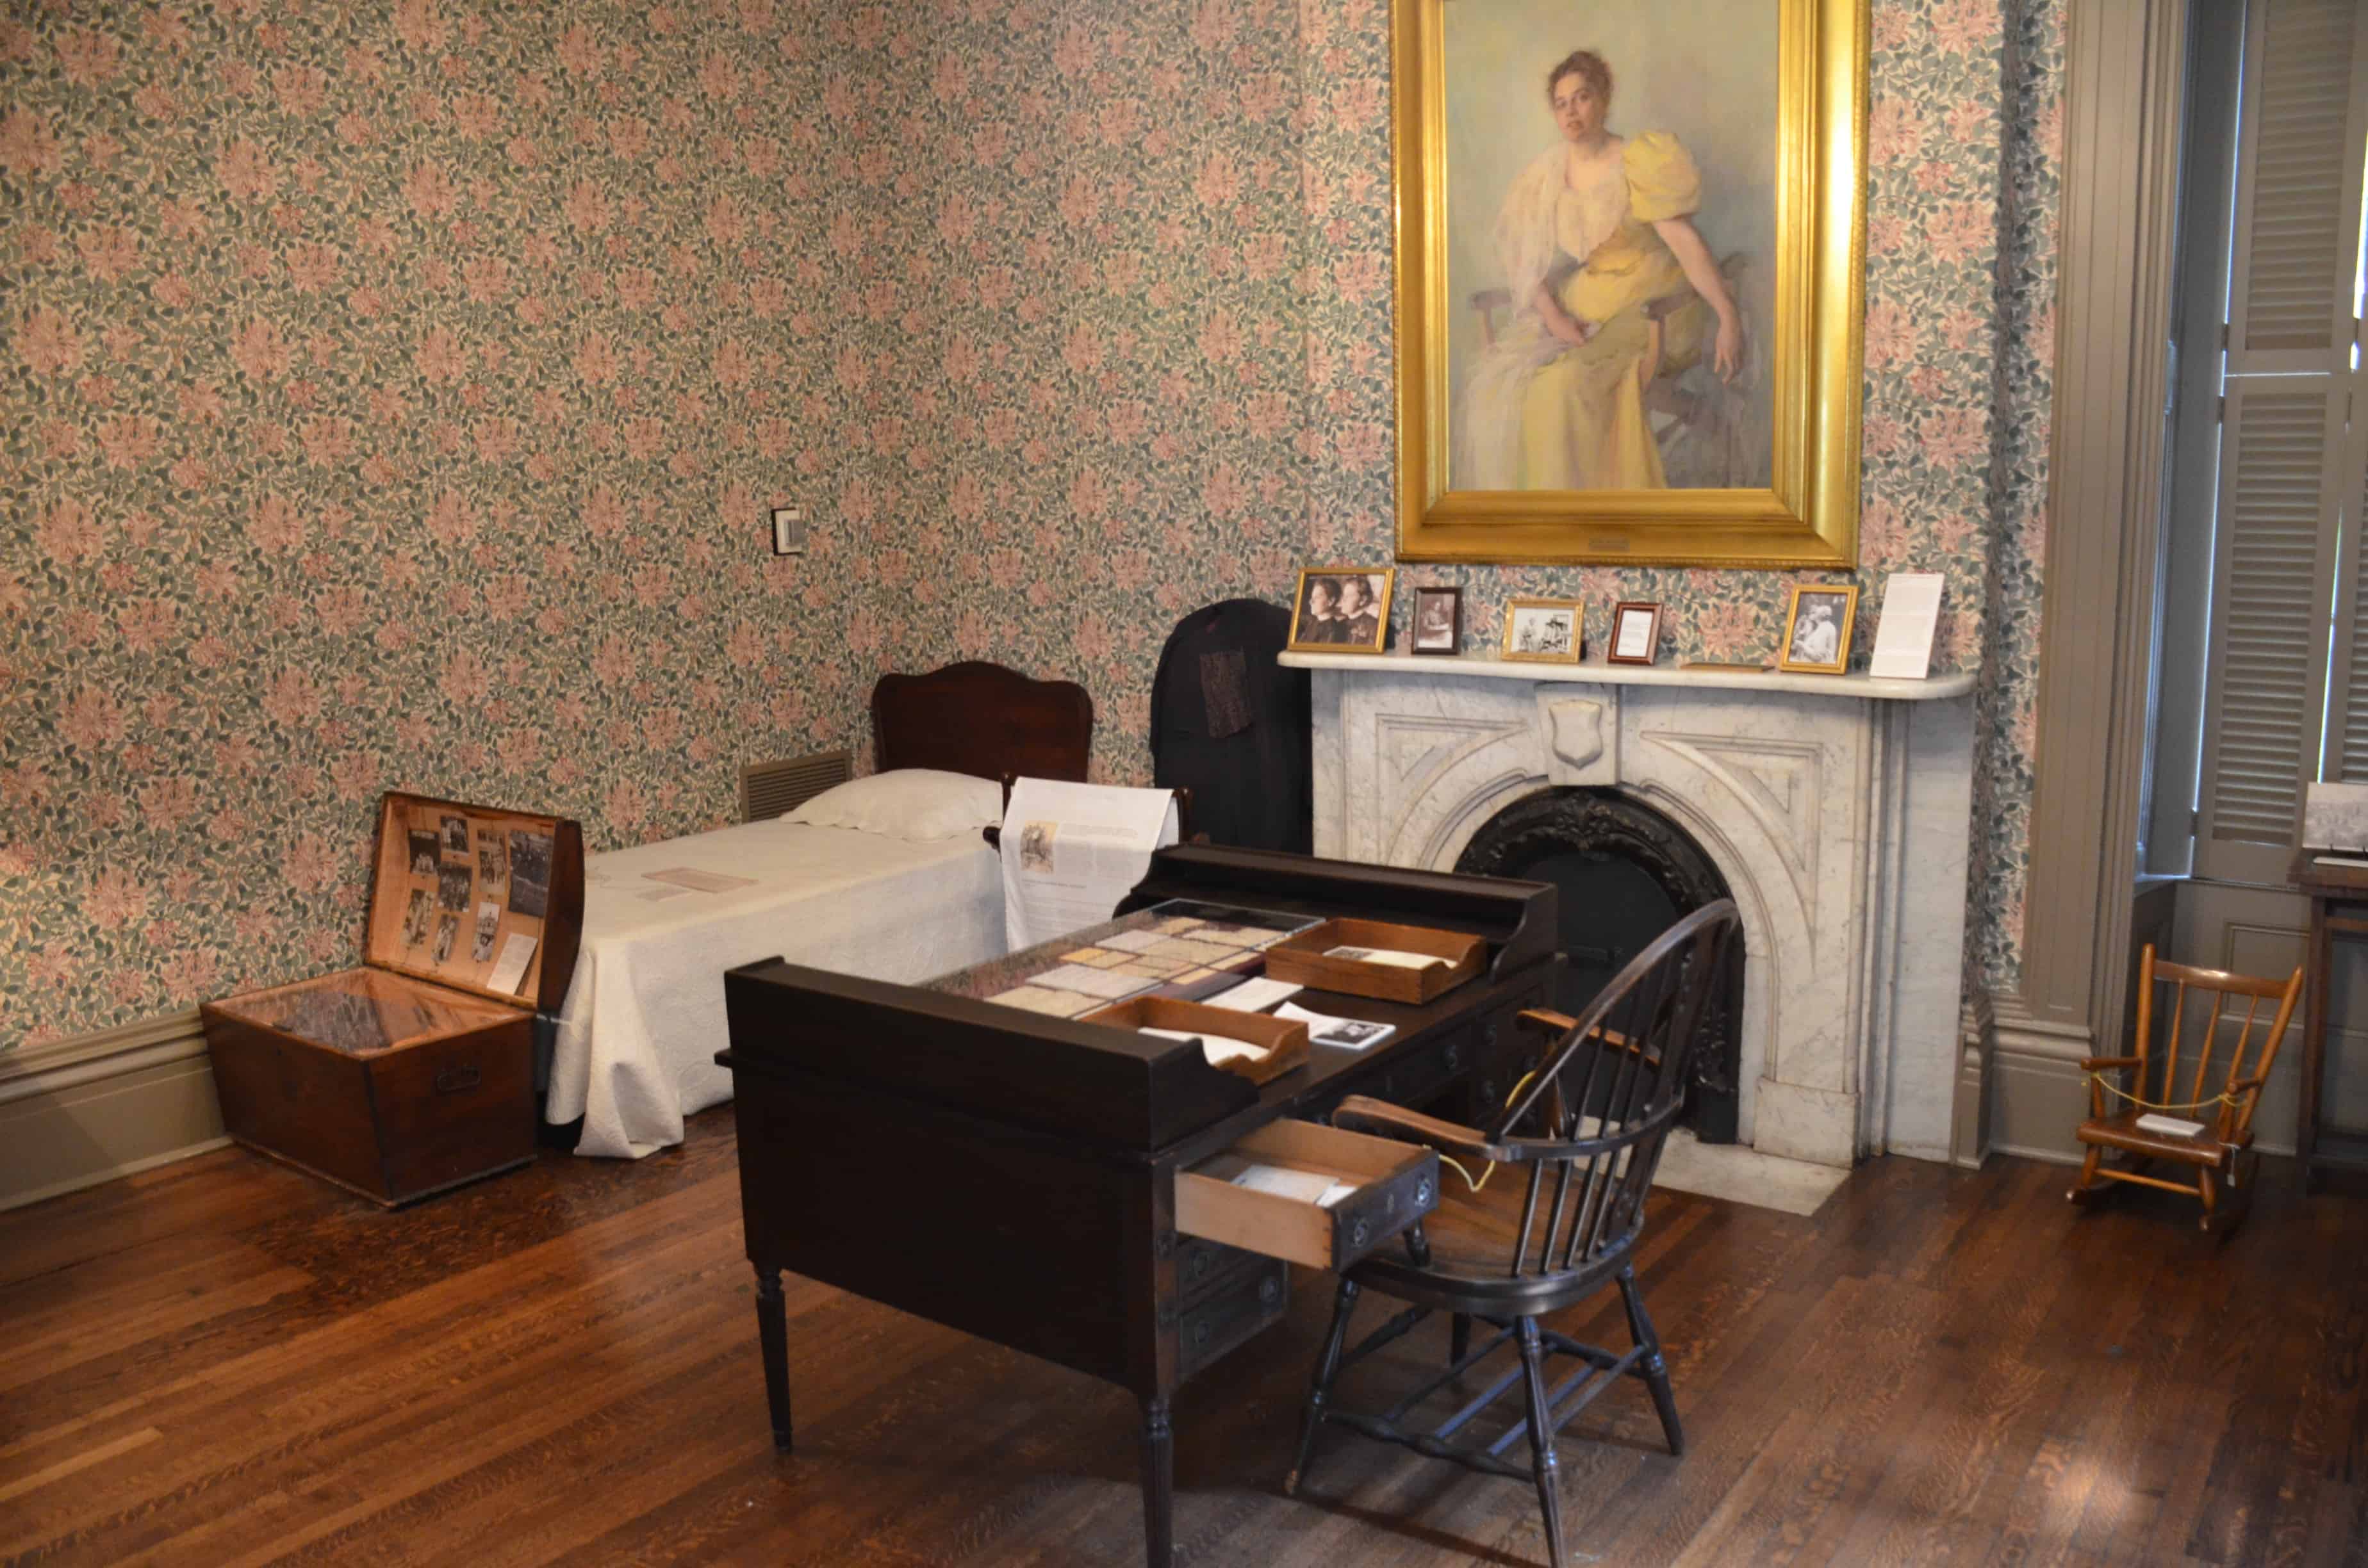 Jane Addams' bedroom at the Hull House in Chicago, Illinois